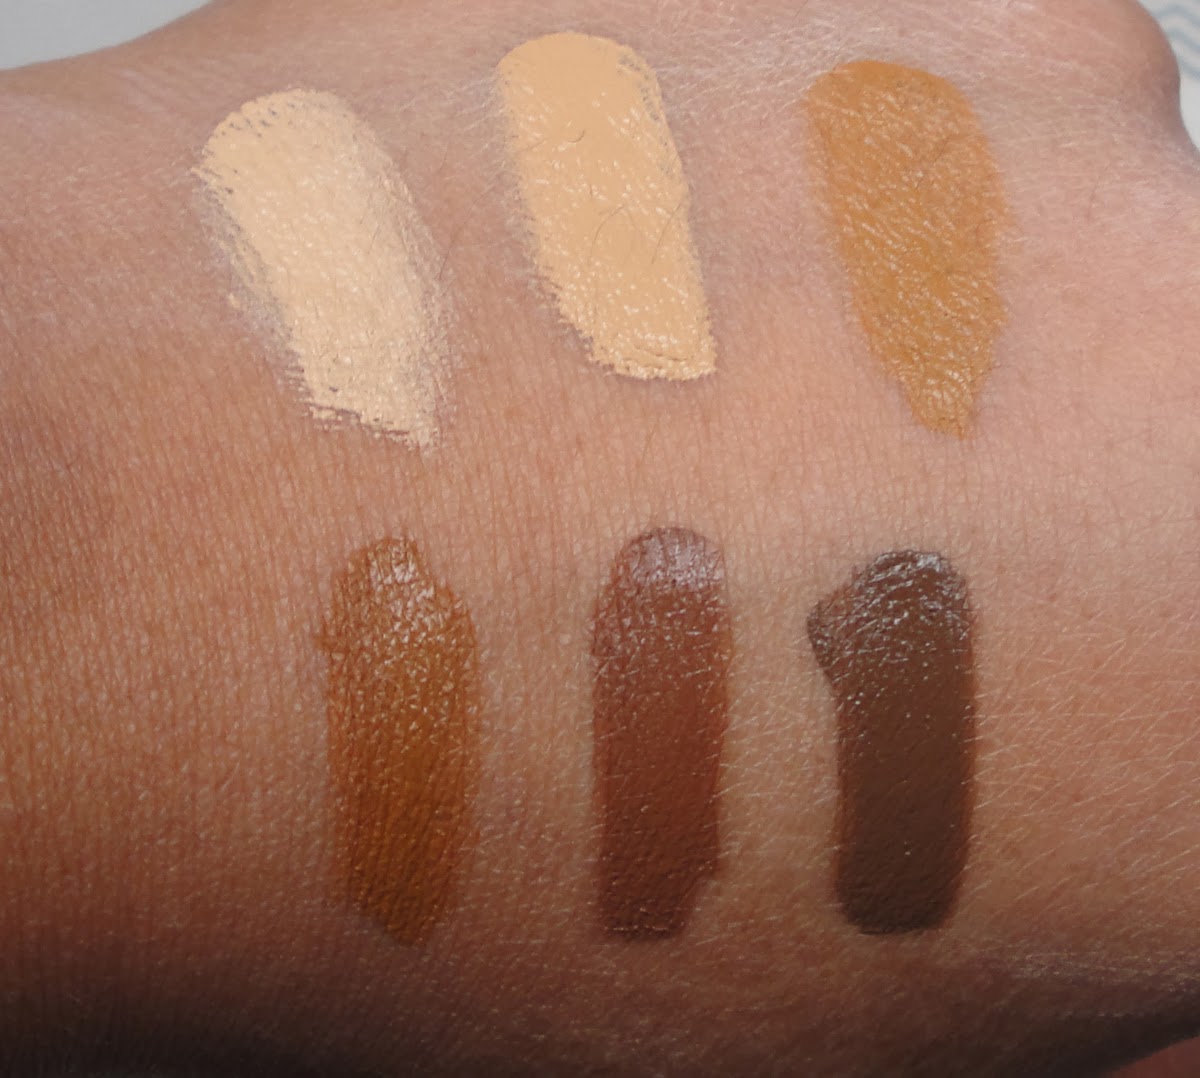 A complete Swatch Guide to RCMA Cream Foundations for Alcone at Home